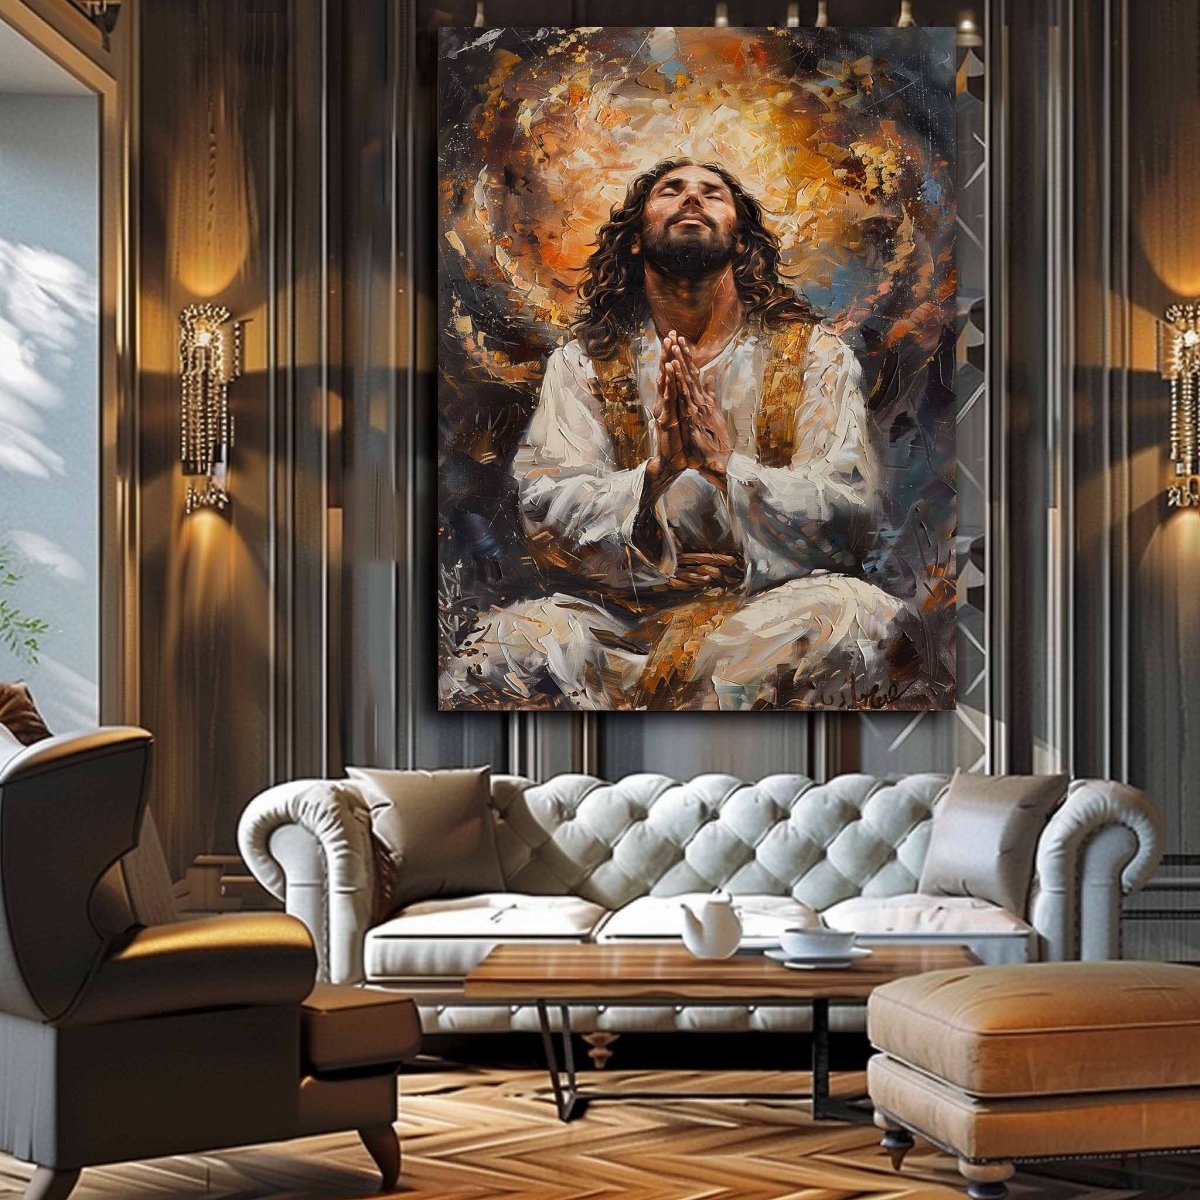 Christ:The Burdened Savior Canvas Wall Painting (24 x 36 Inches)